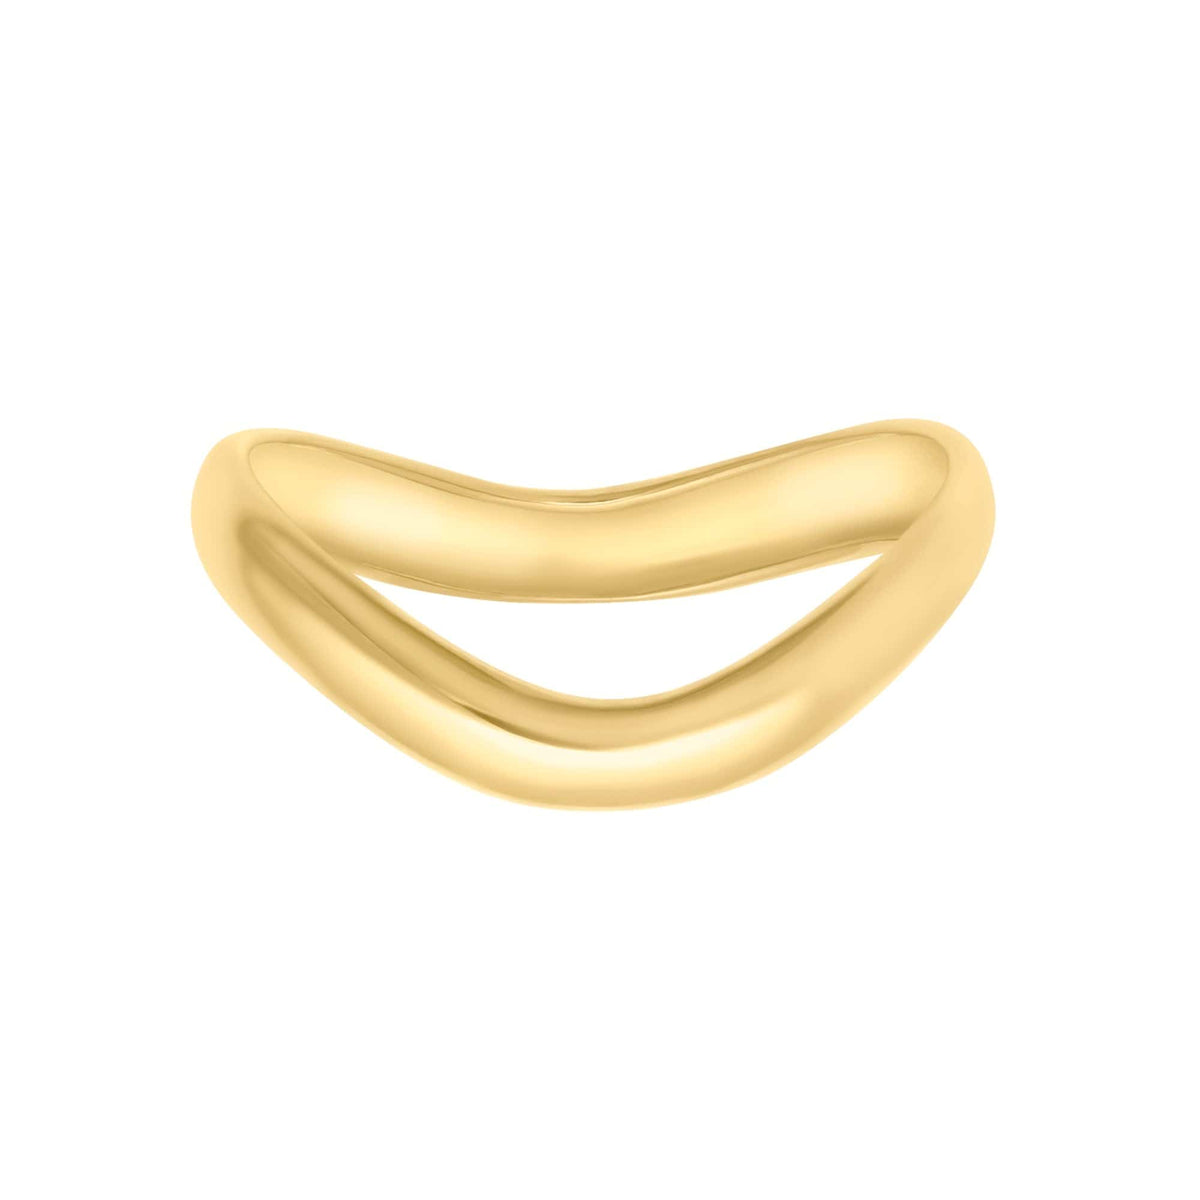 BohoMoon Stainless Steel Torrance Ring Gold / US 6 / UK L / EUR 51 (small)